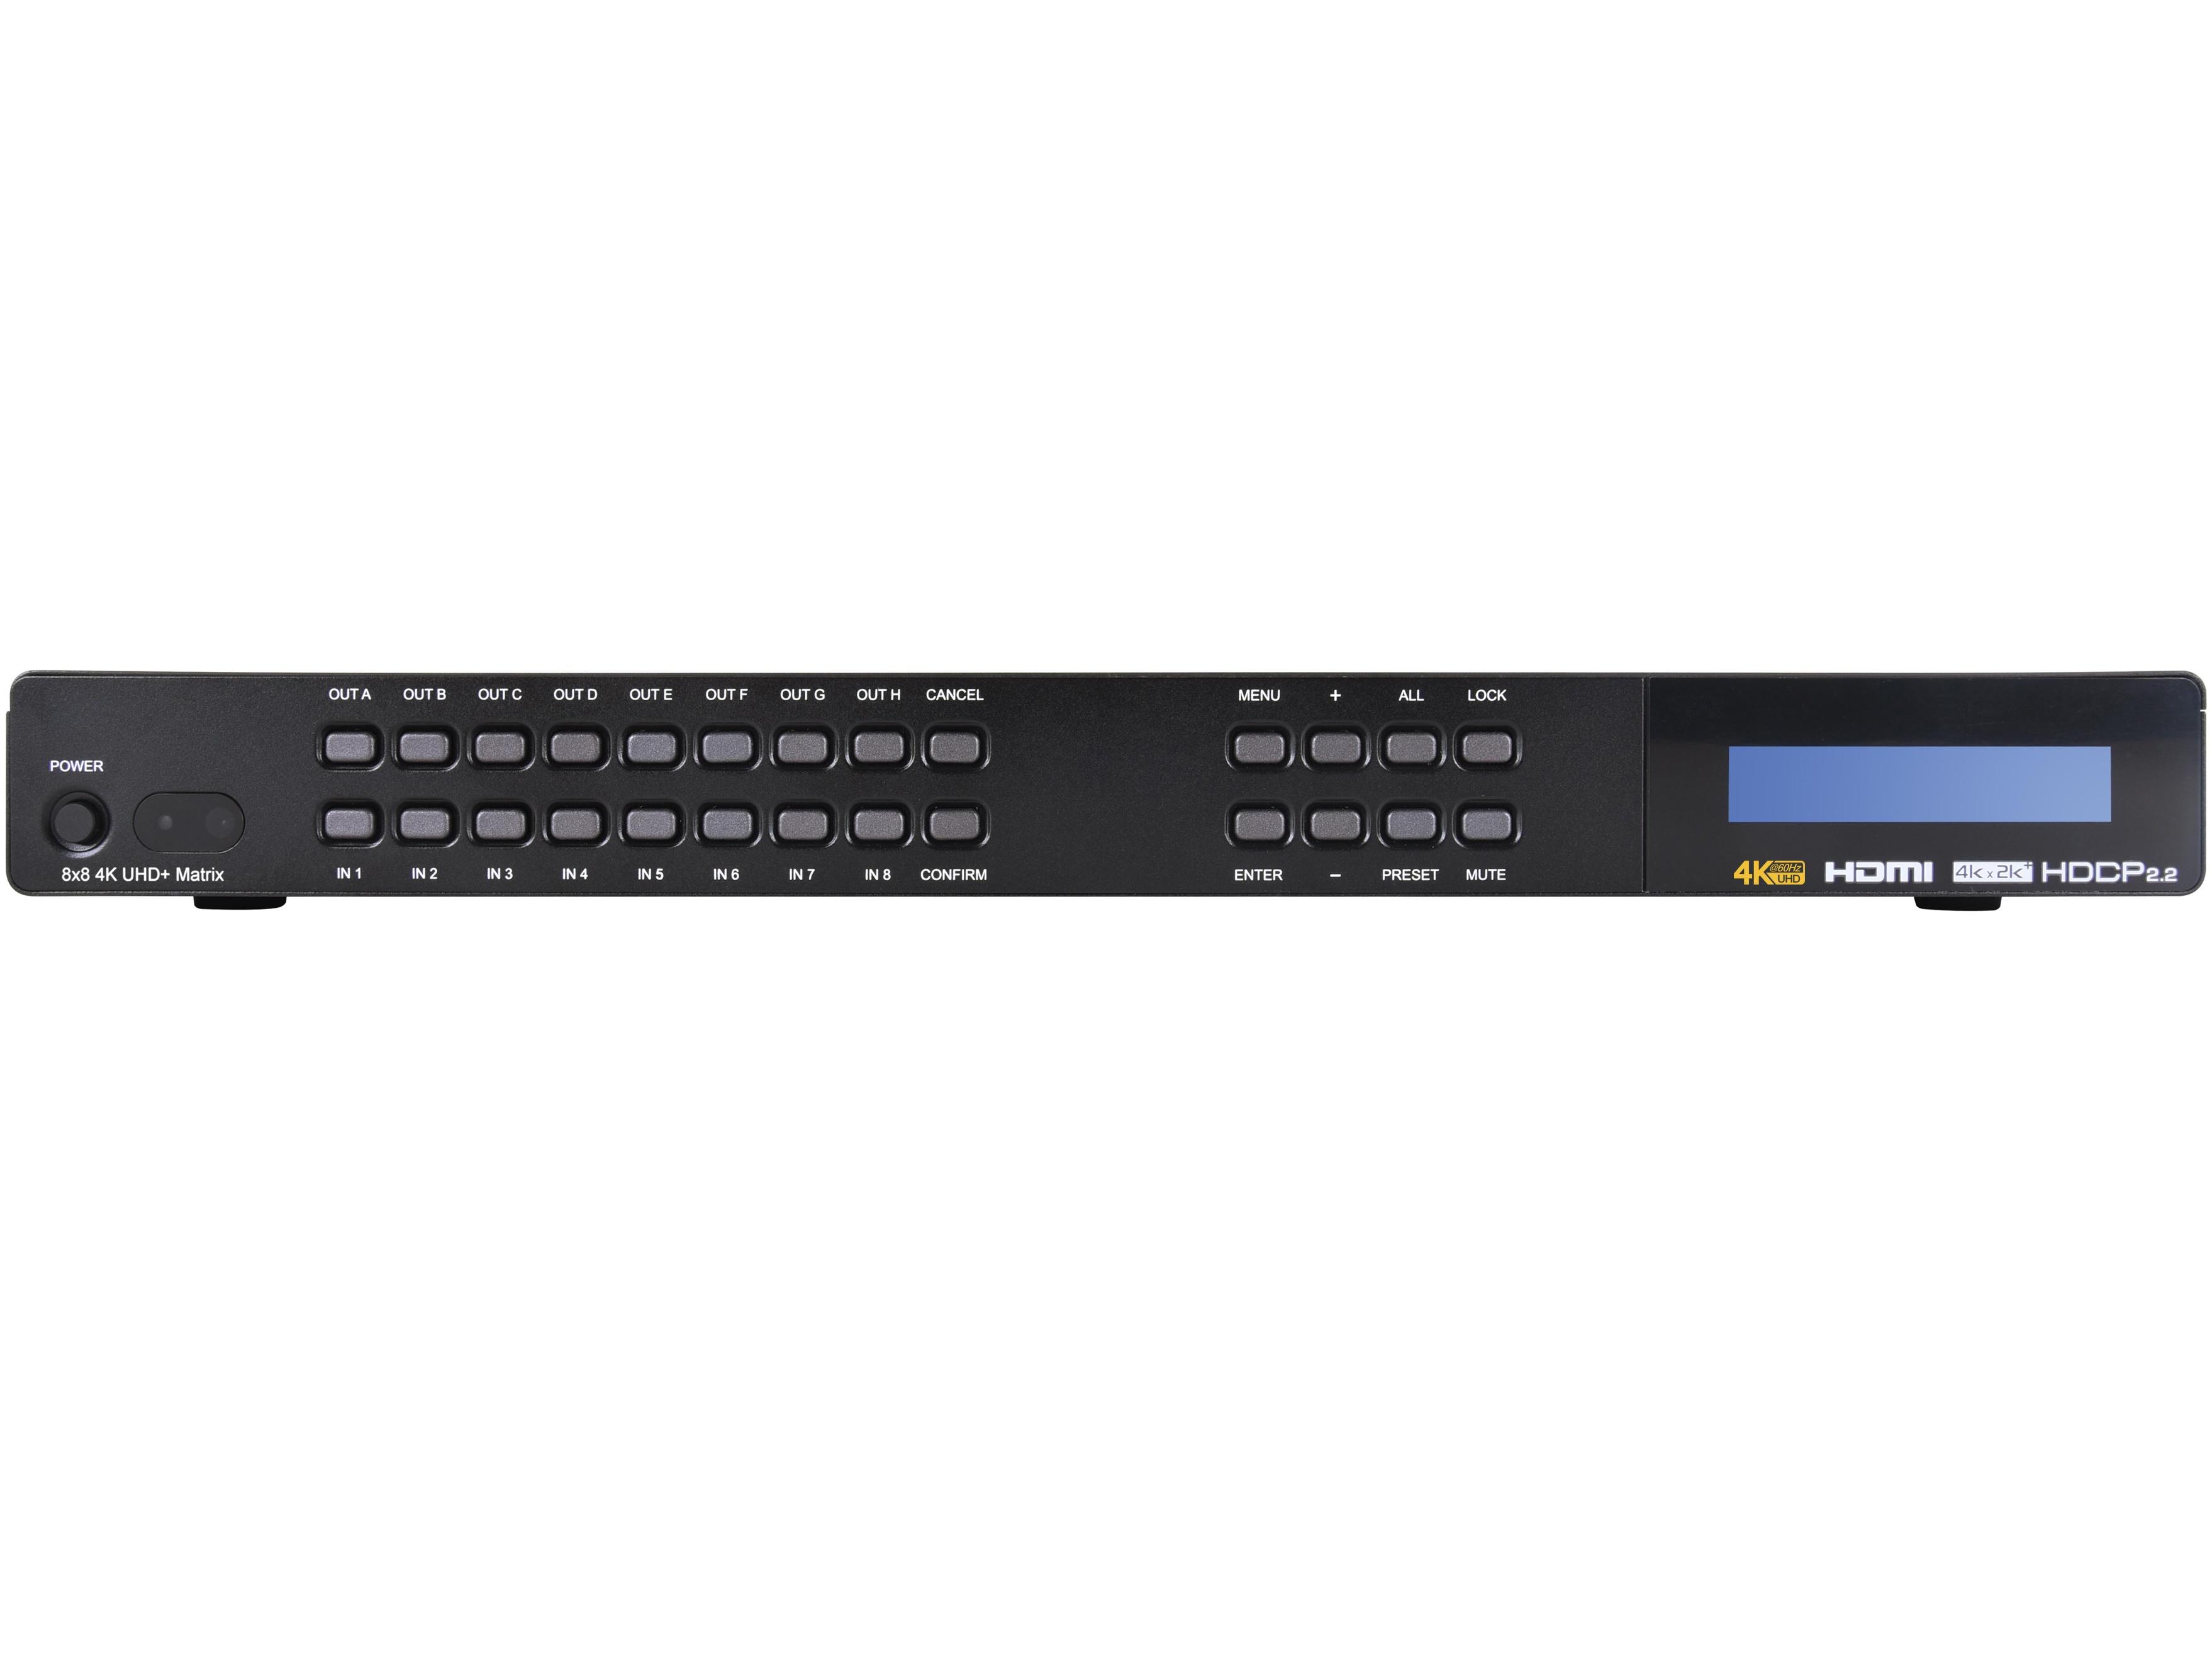 ANI-88HDRH 8x8 HDR HDCP 2.2 4K/60Hz HDMI 18G Matrix Switcher Scaler with USB Power Ports by A-NeuVideo